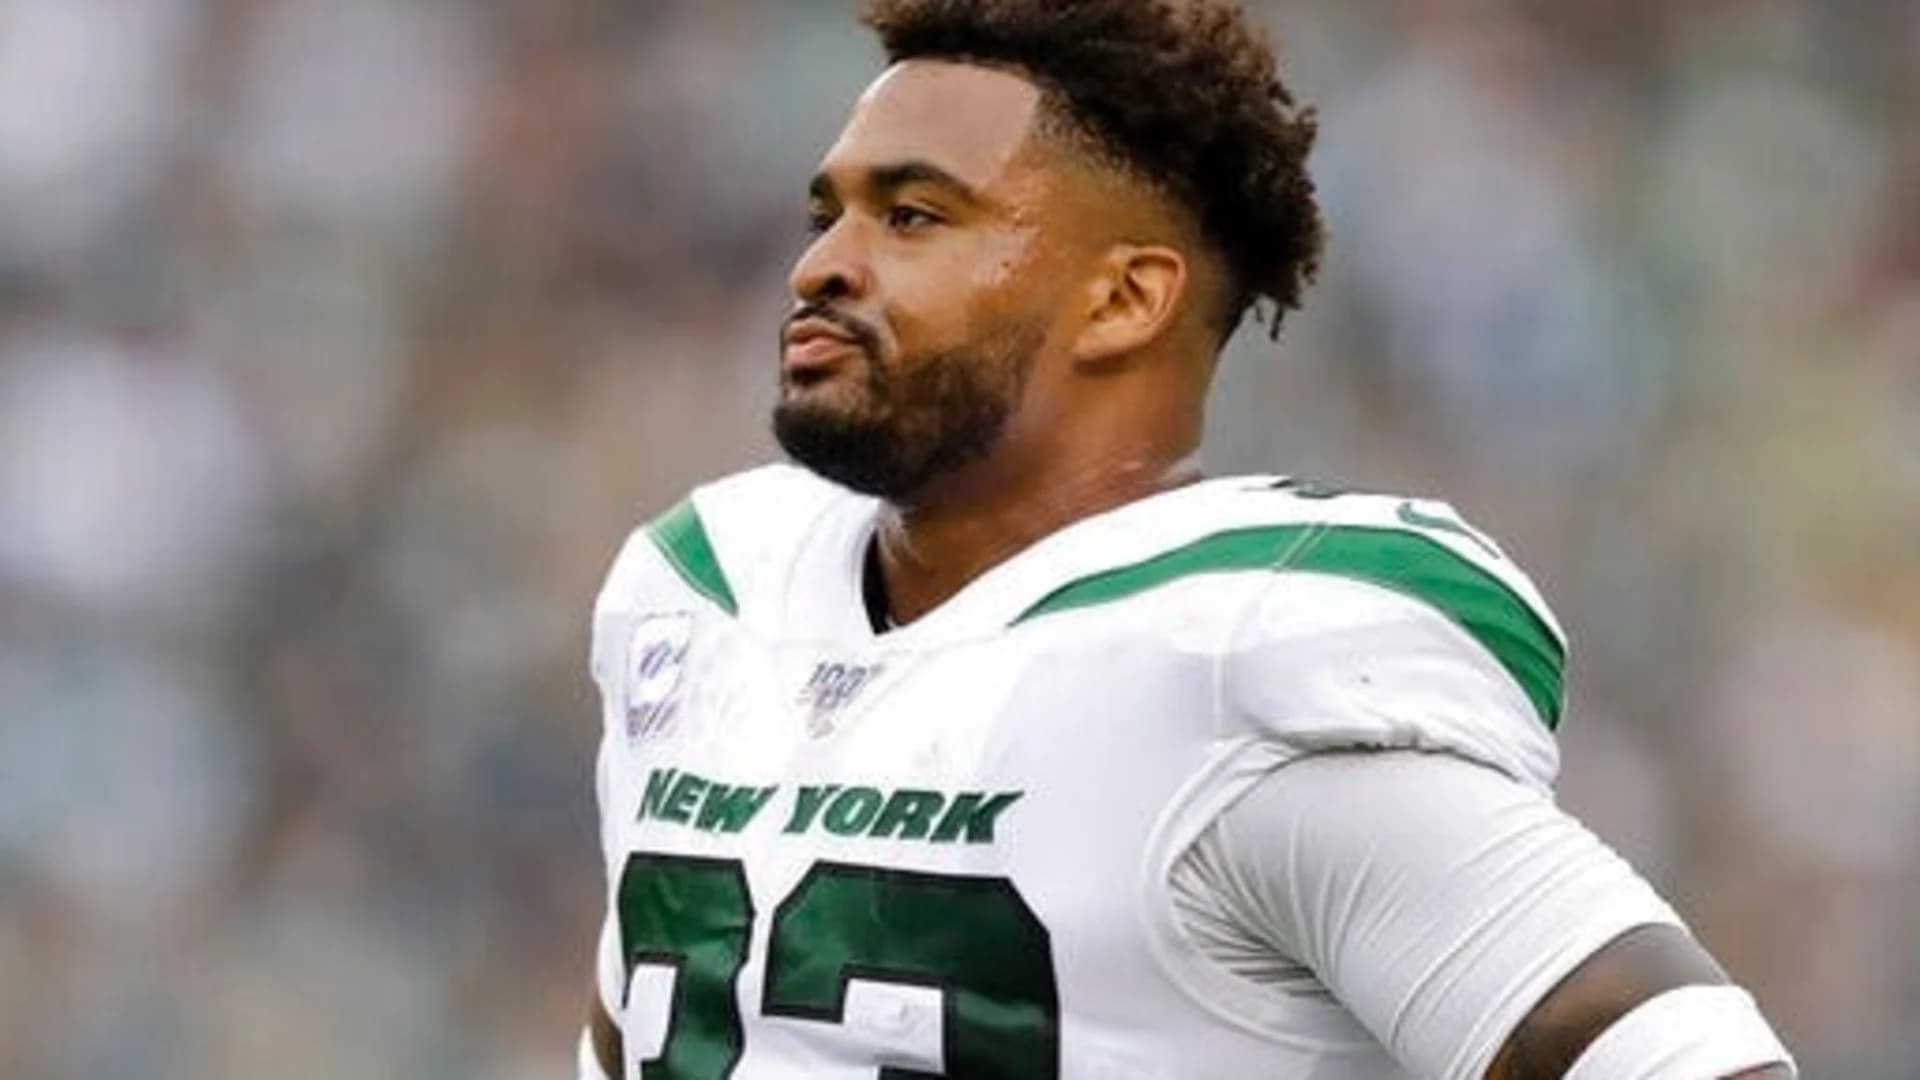 Jets star Jamal Adams claims team went behind his back, sought trade ahead of deadline